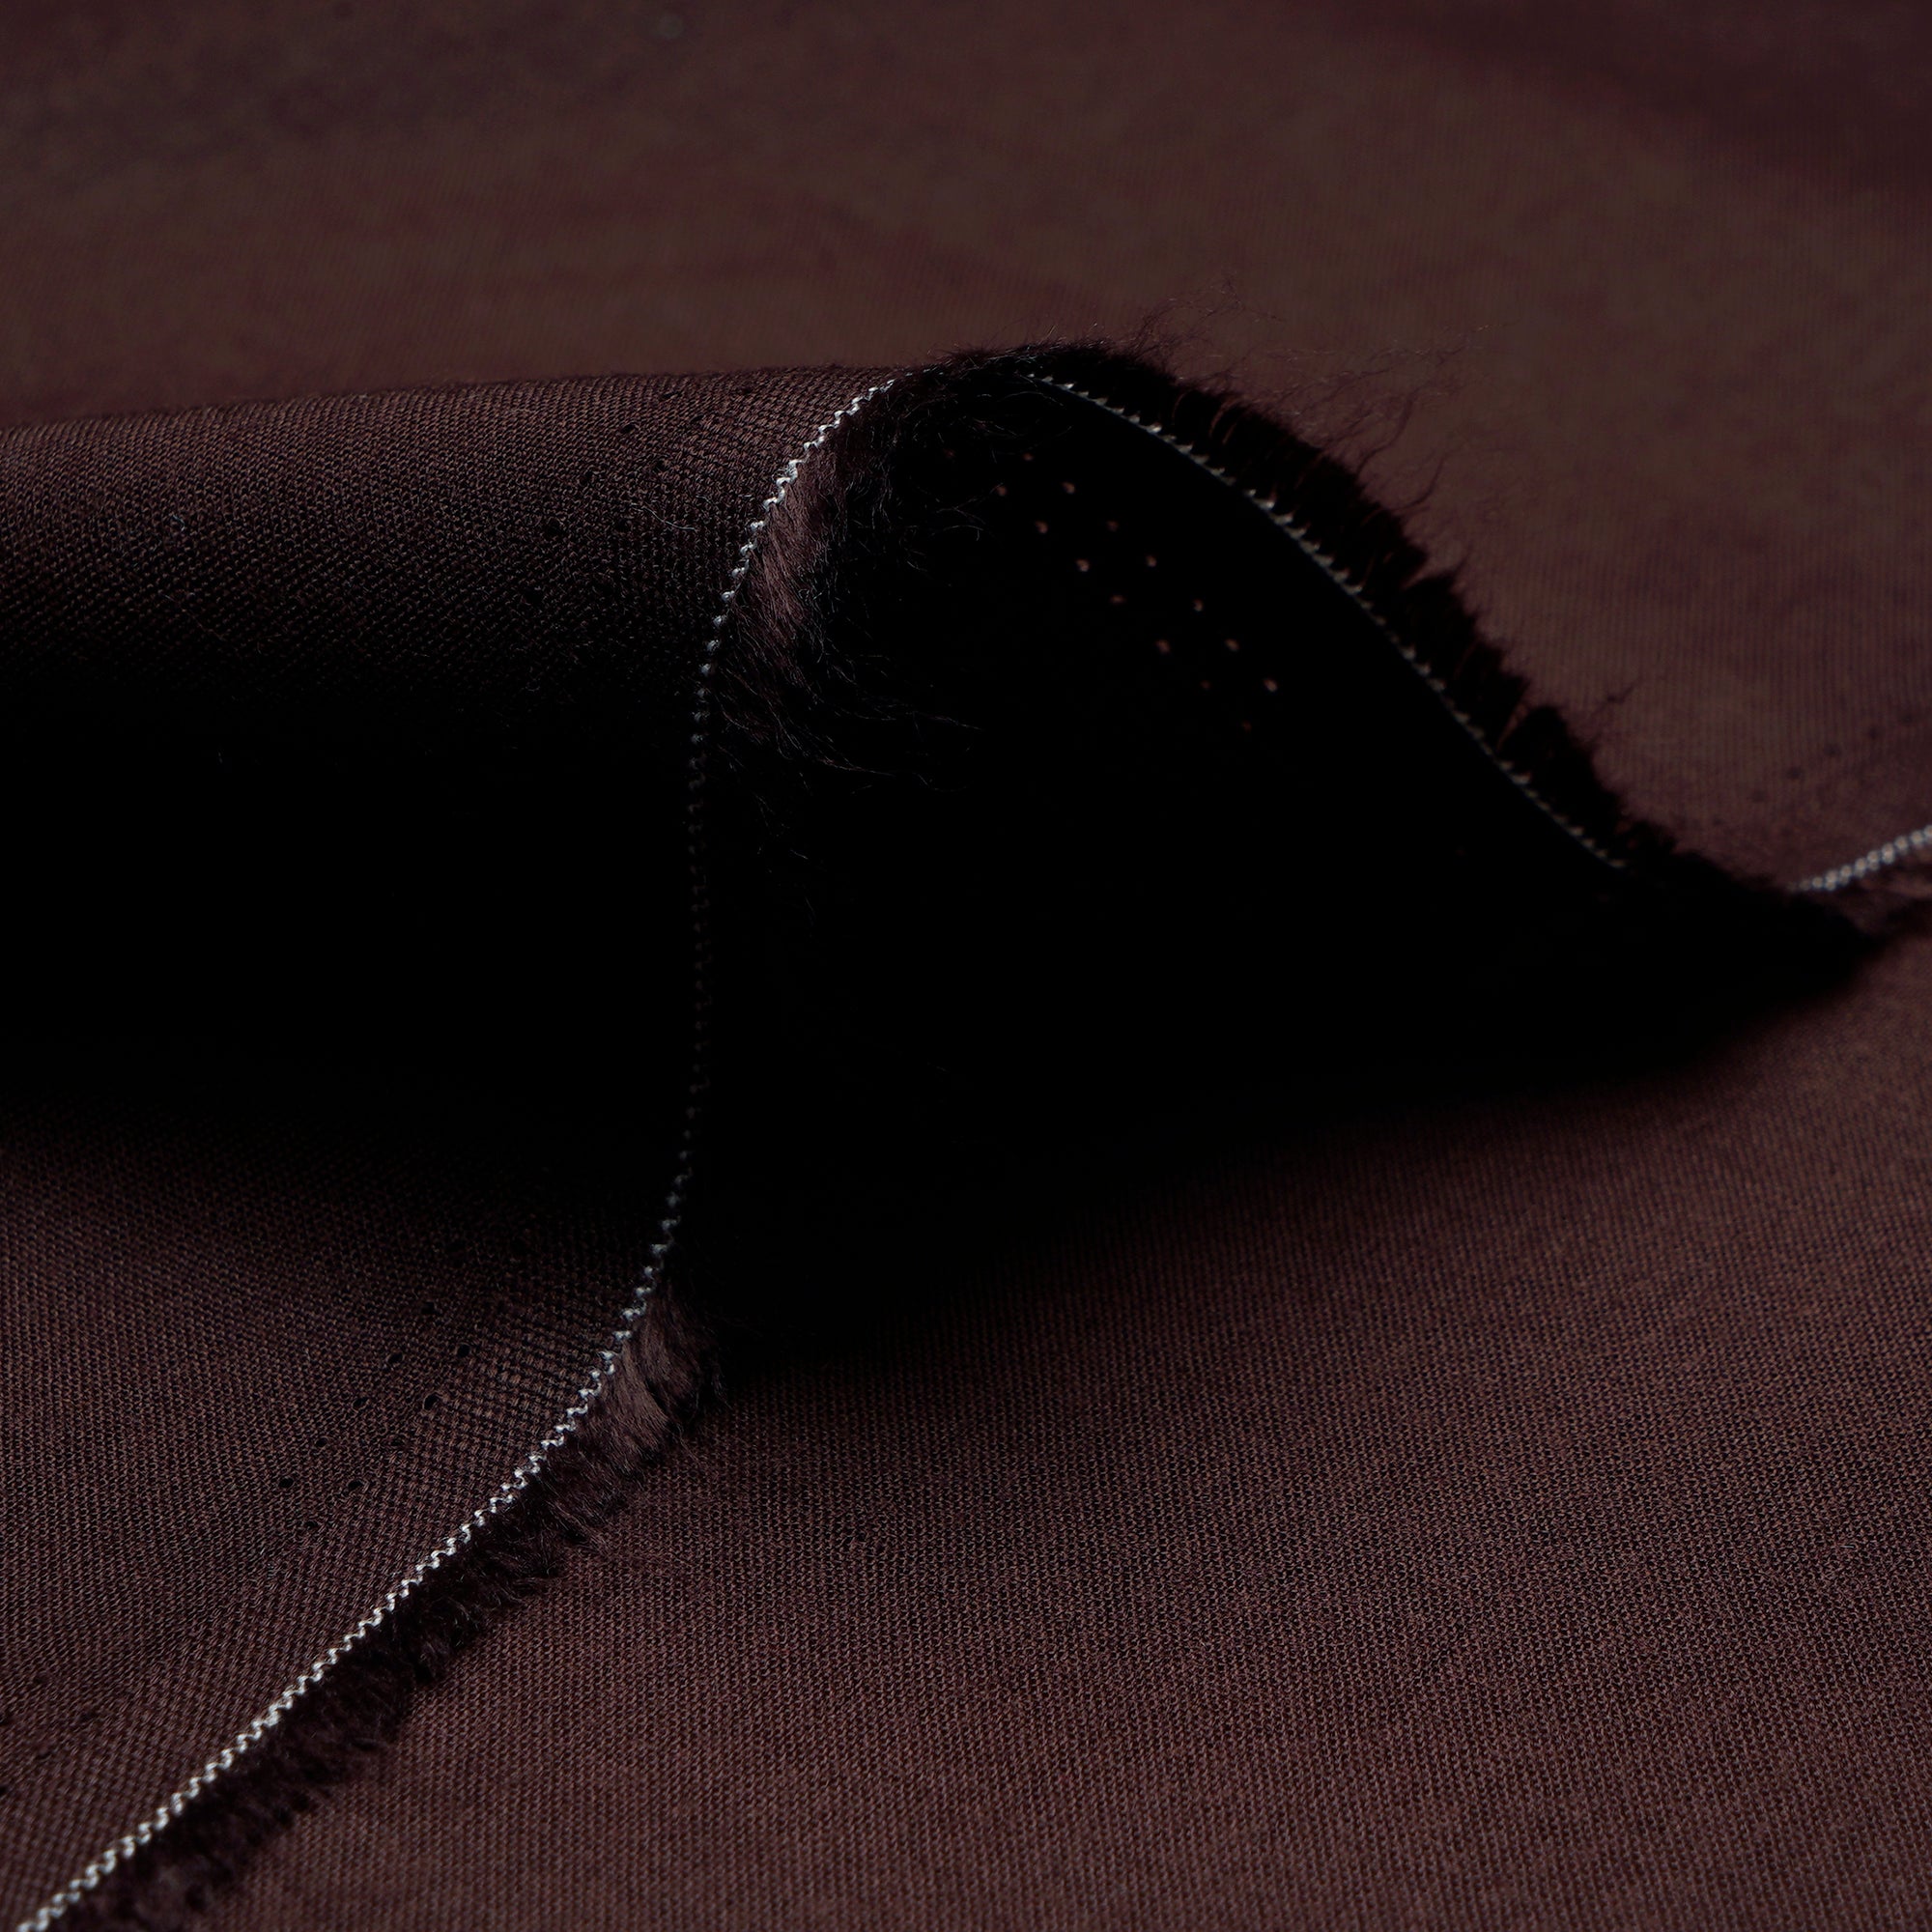 Brown Plain Mill Dyed Rayon Fabric